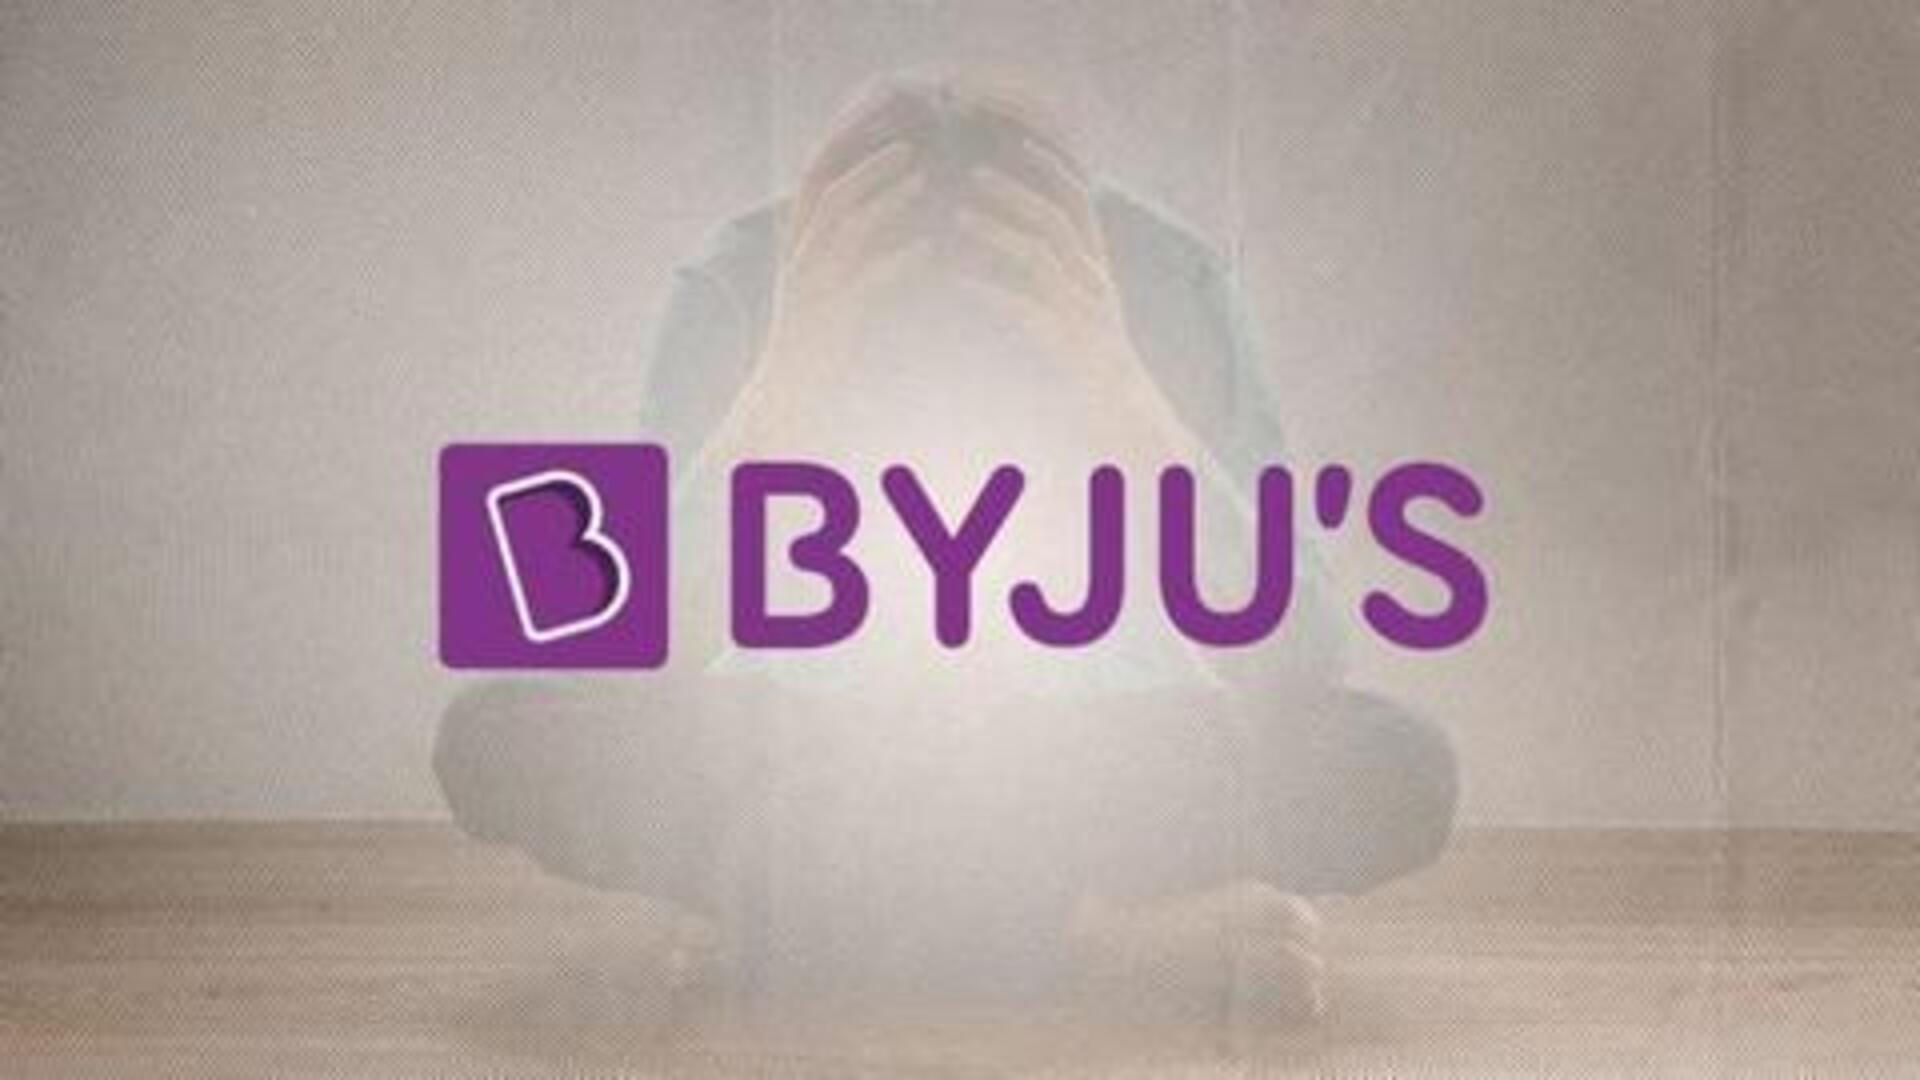 BYJU'S shuts down offices, asks employees to work from home